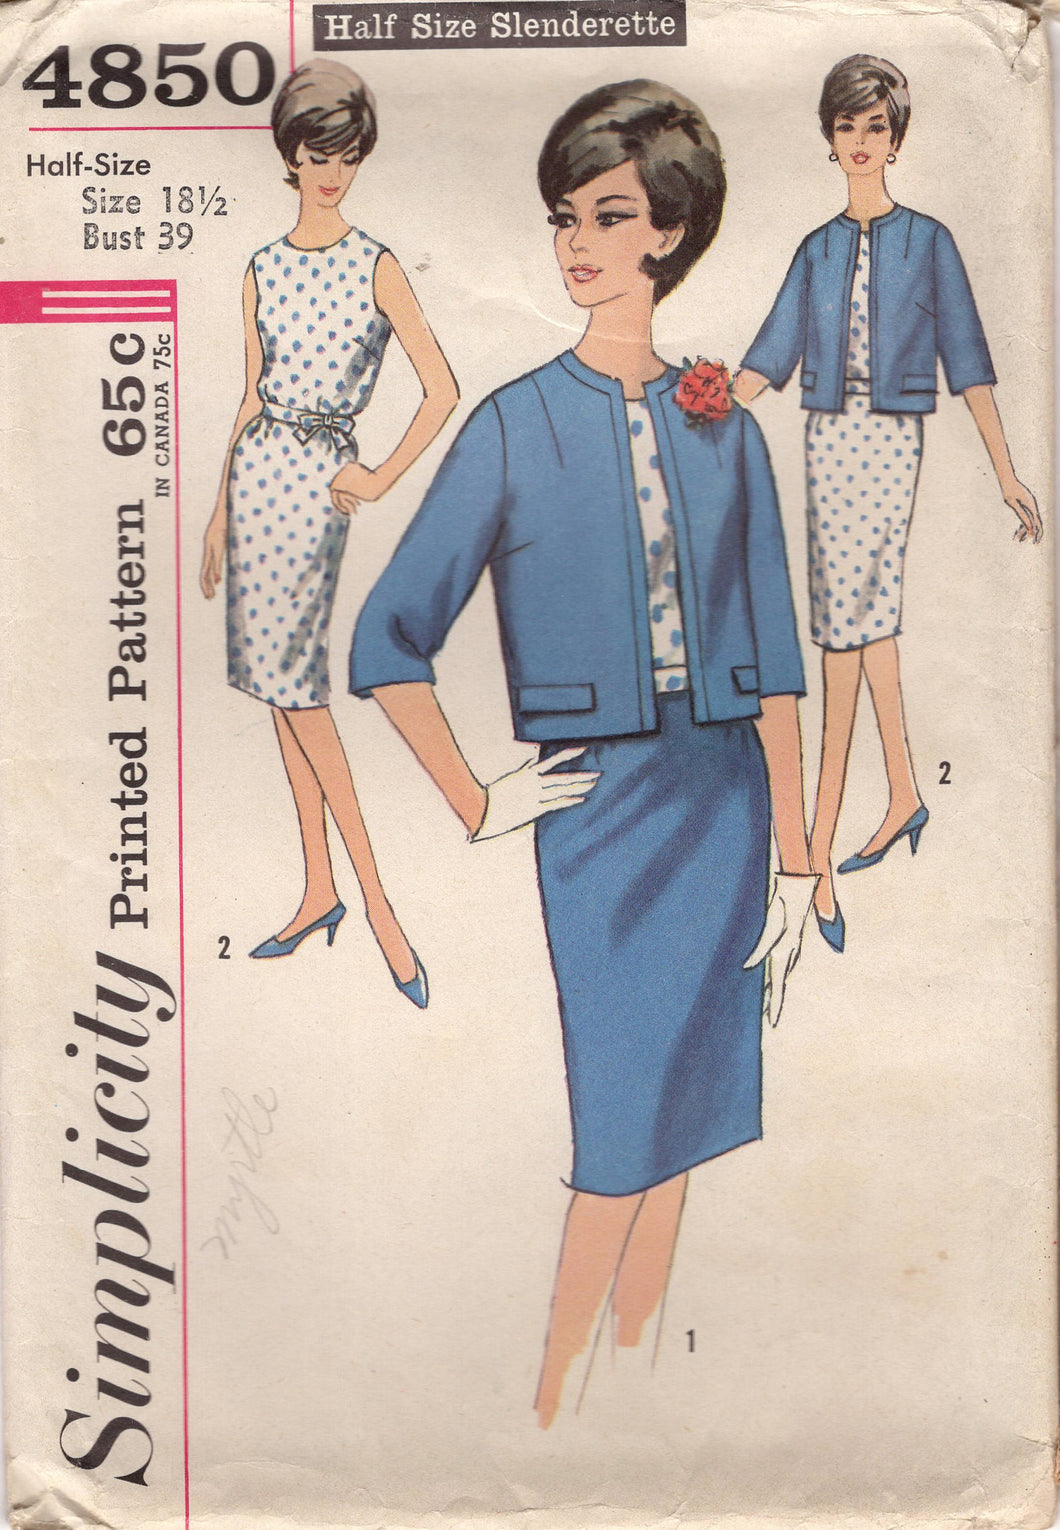 1960's Simplicity Sleeveless Blouse, Pencil Skirt and Boxy Jacket pattern - Bust 39